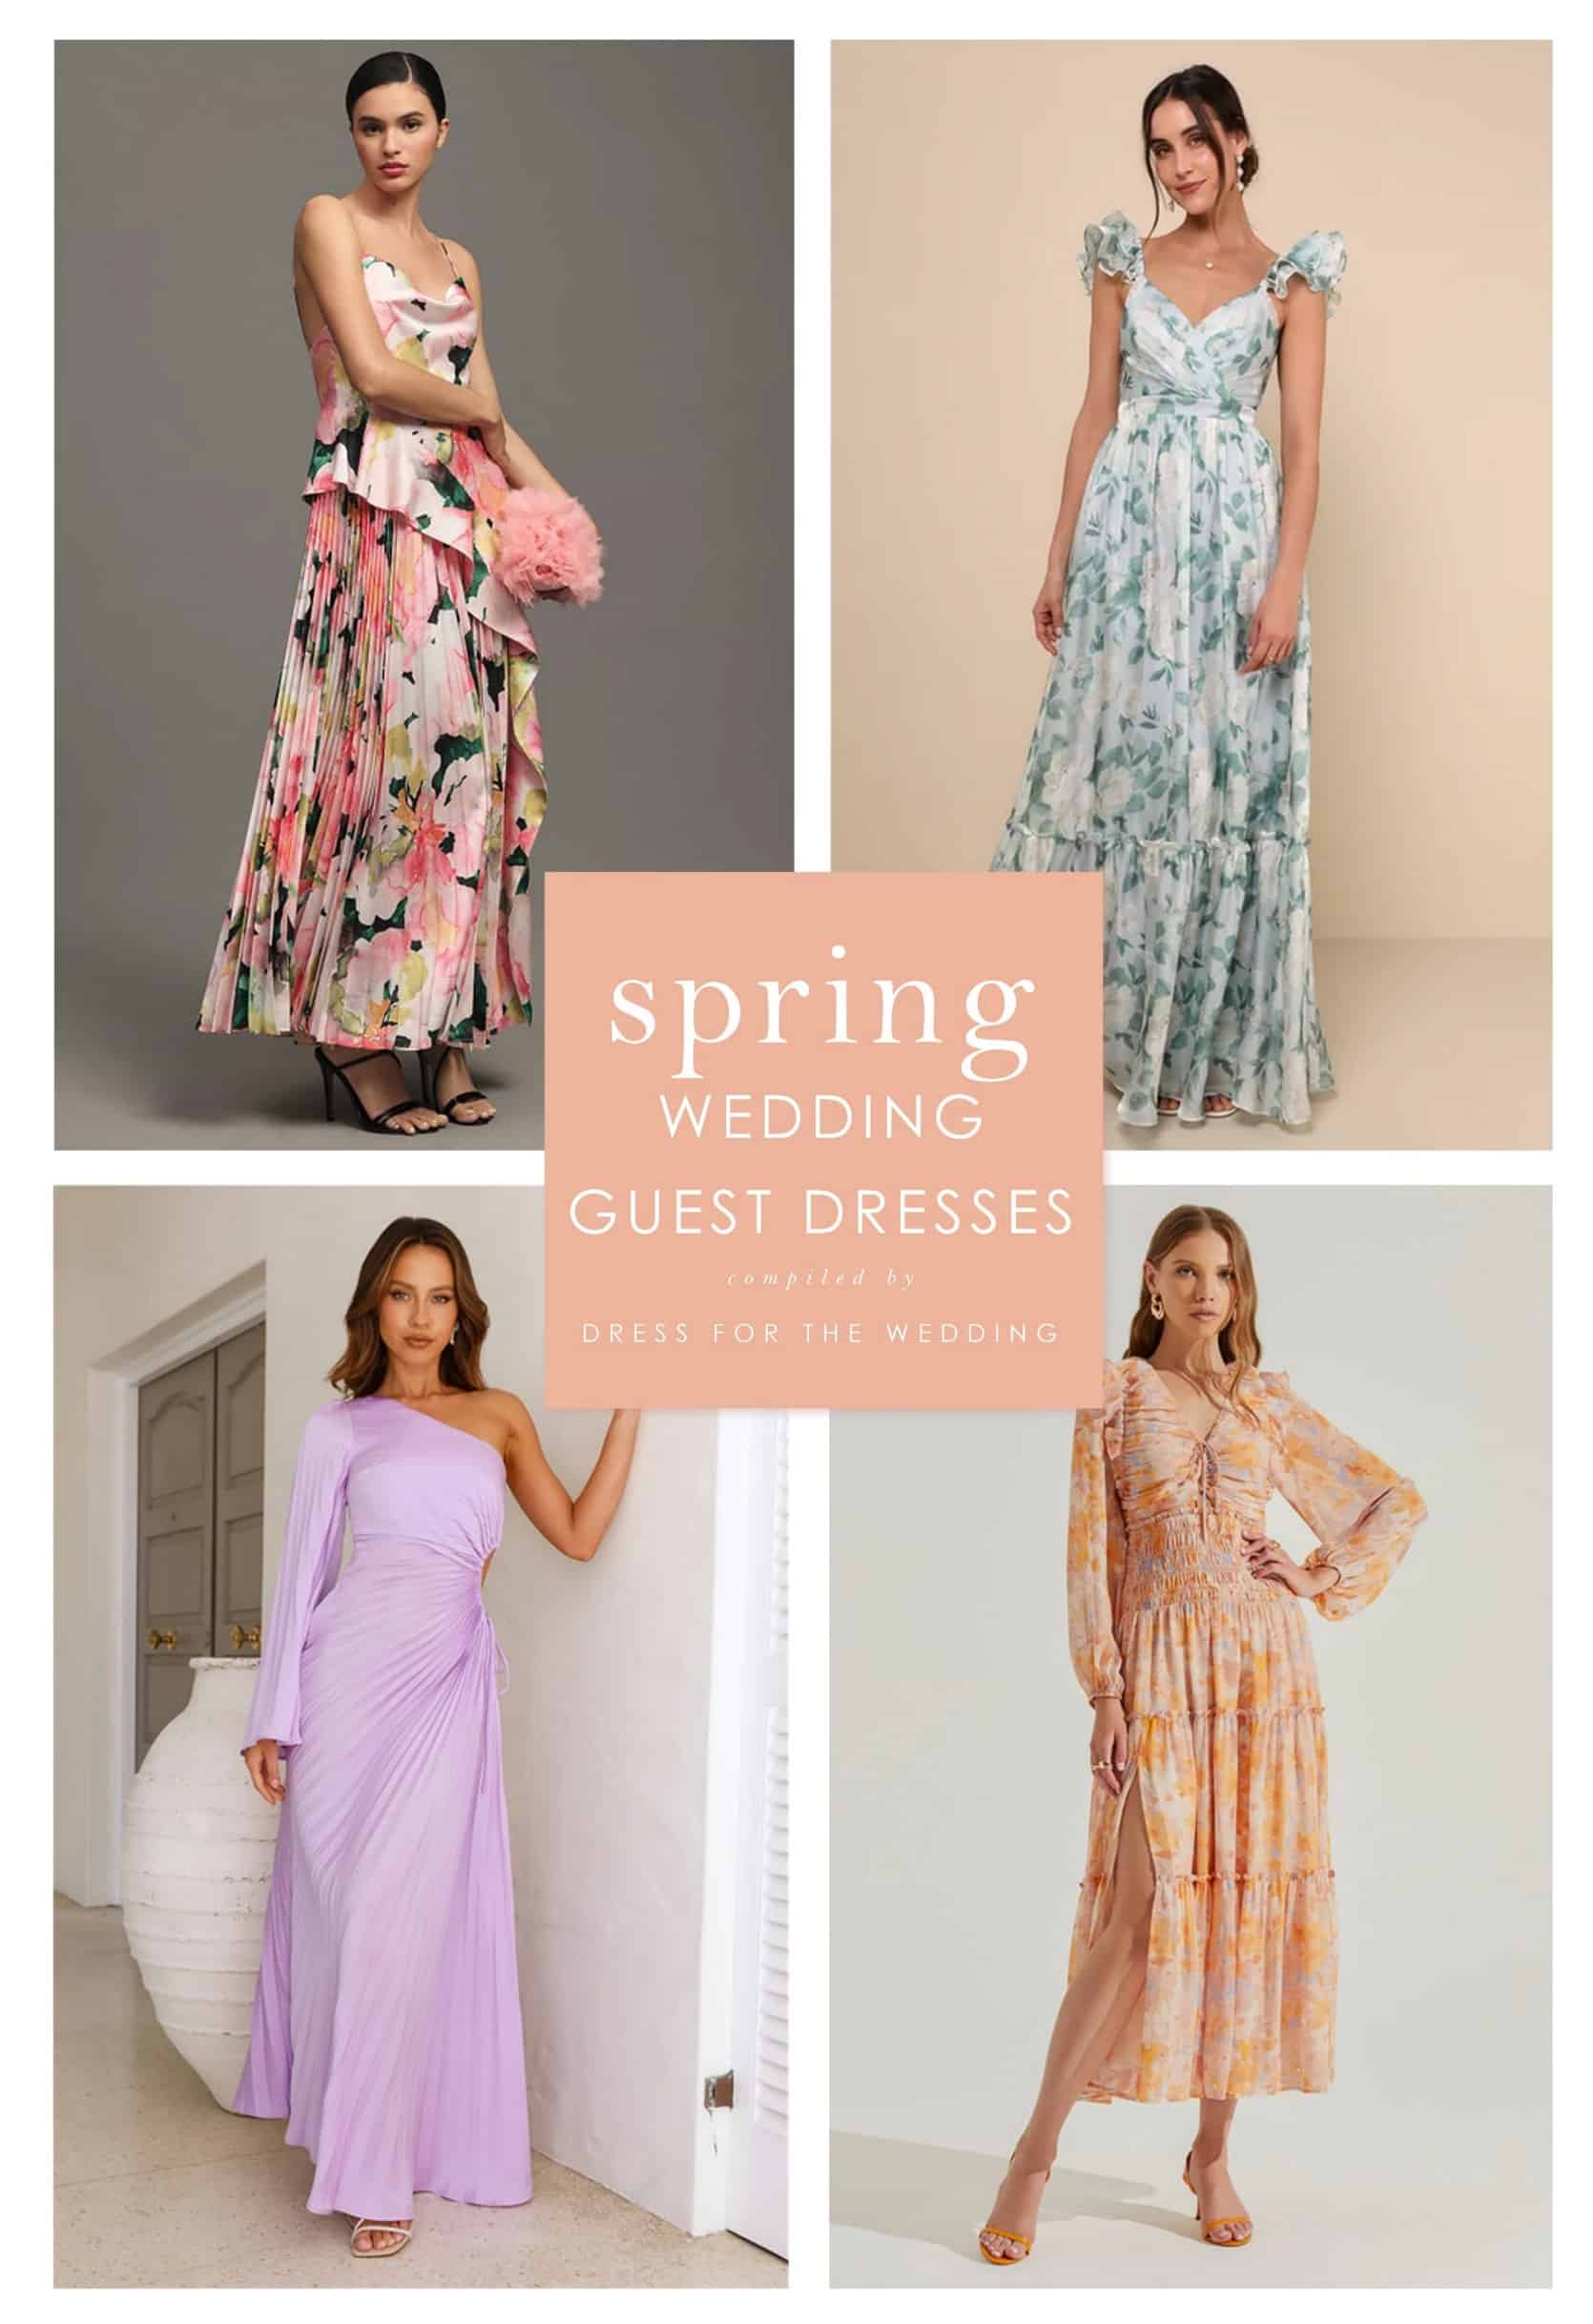 How To Have A Simple And Elegant Spring Wedding